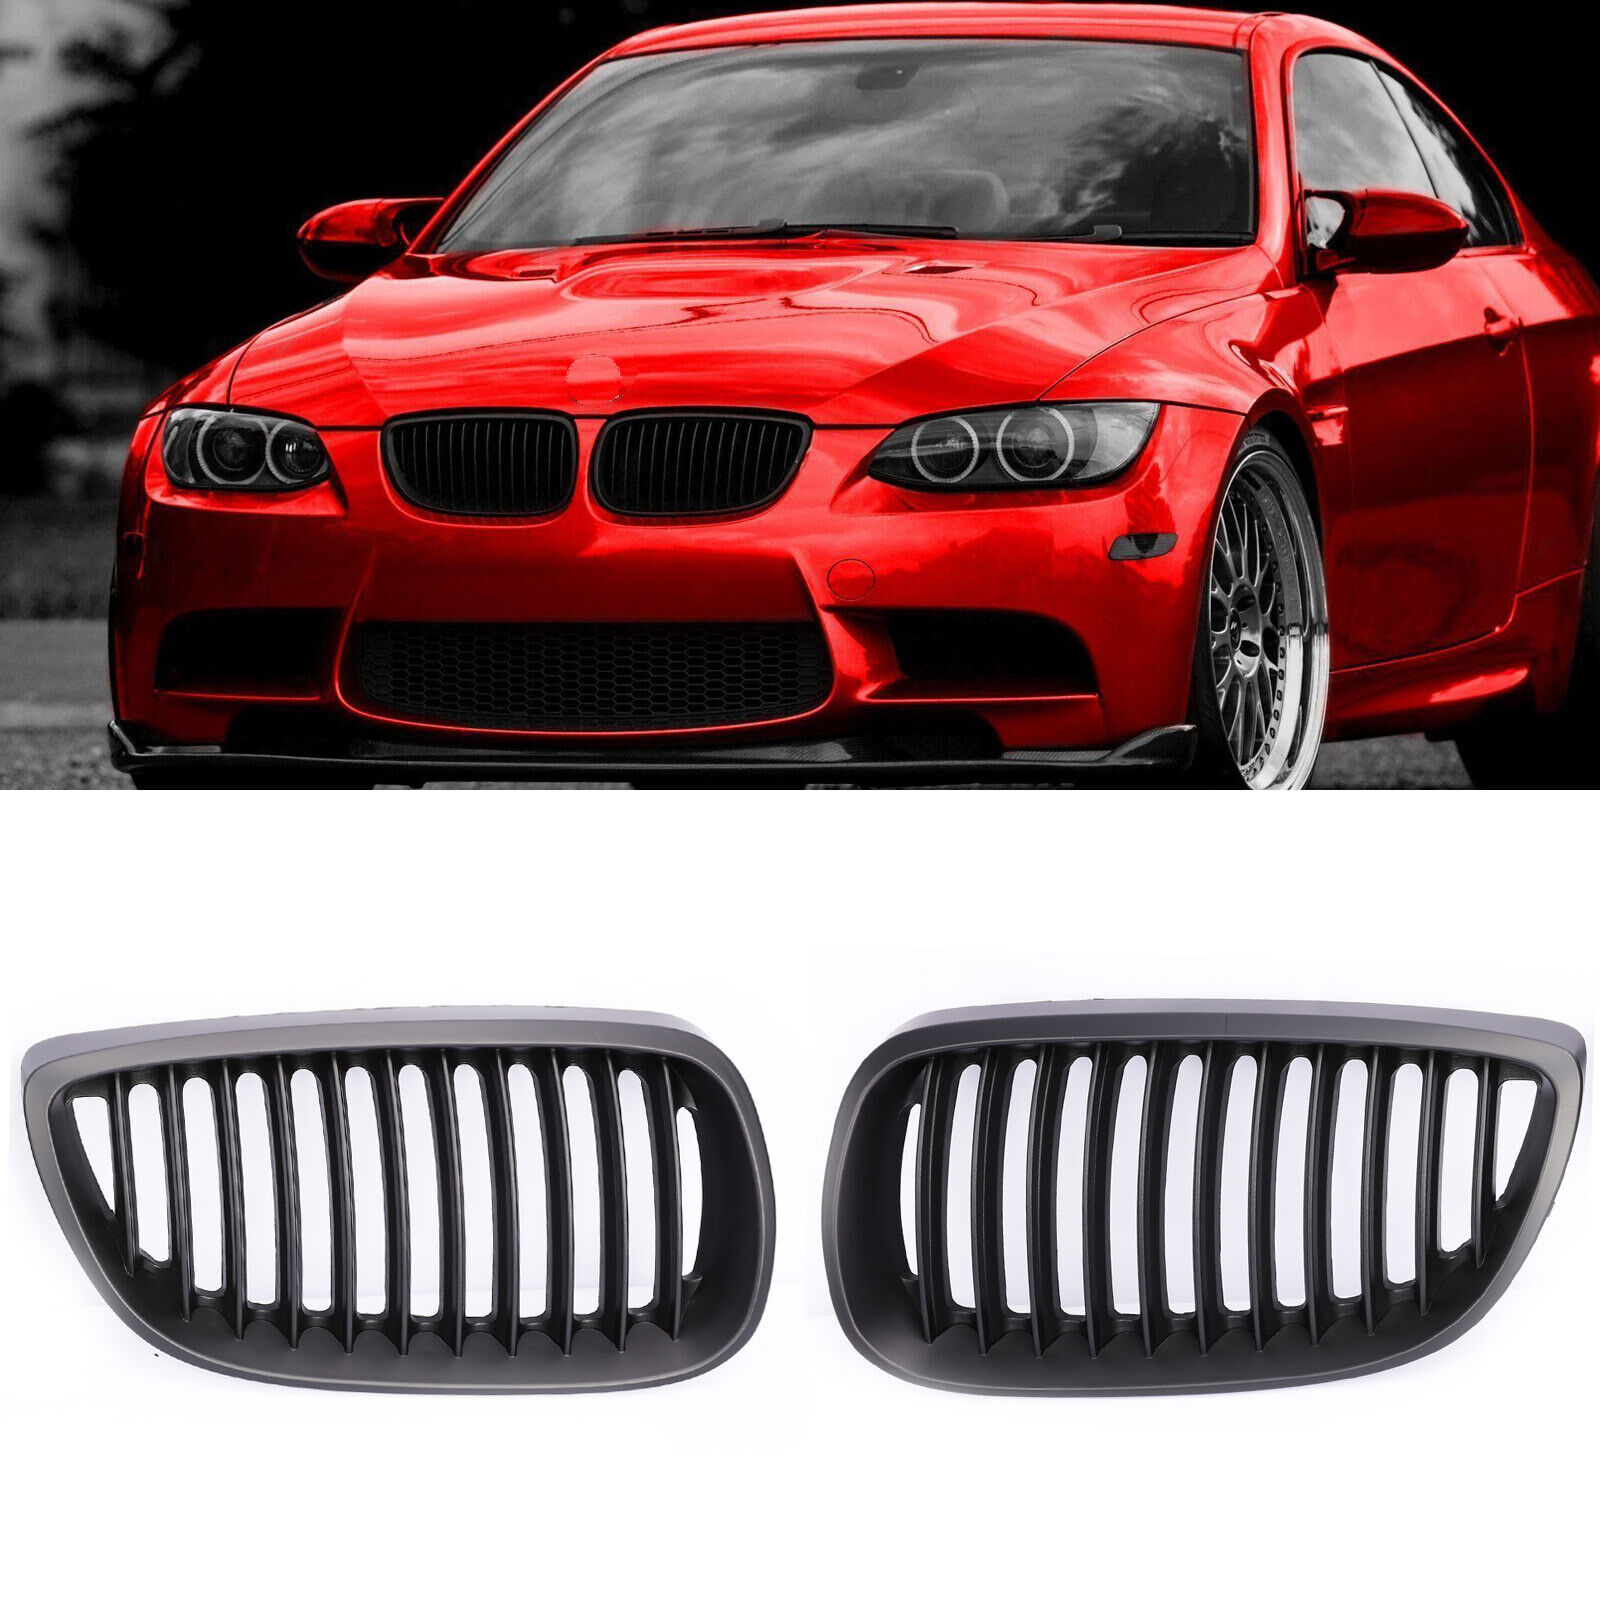 Matte Black Front Kidney Grill Grille for BMW E92 E93 M3 style 328i Coupe 07-10